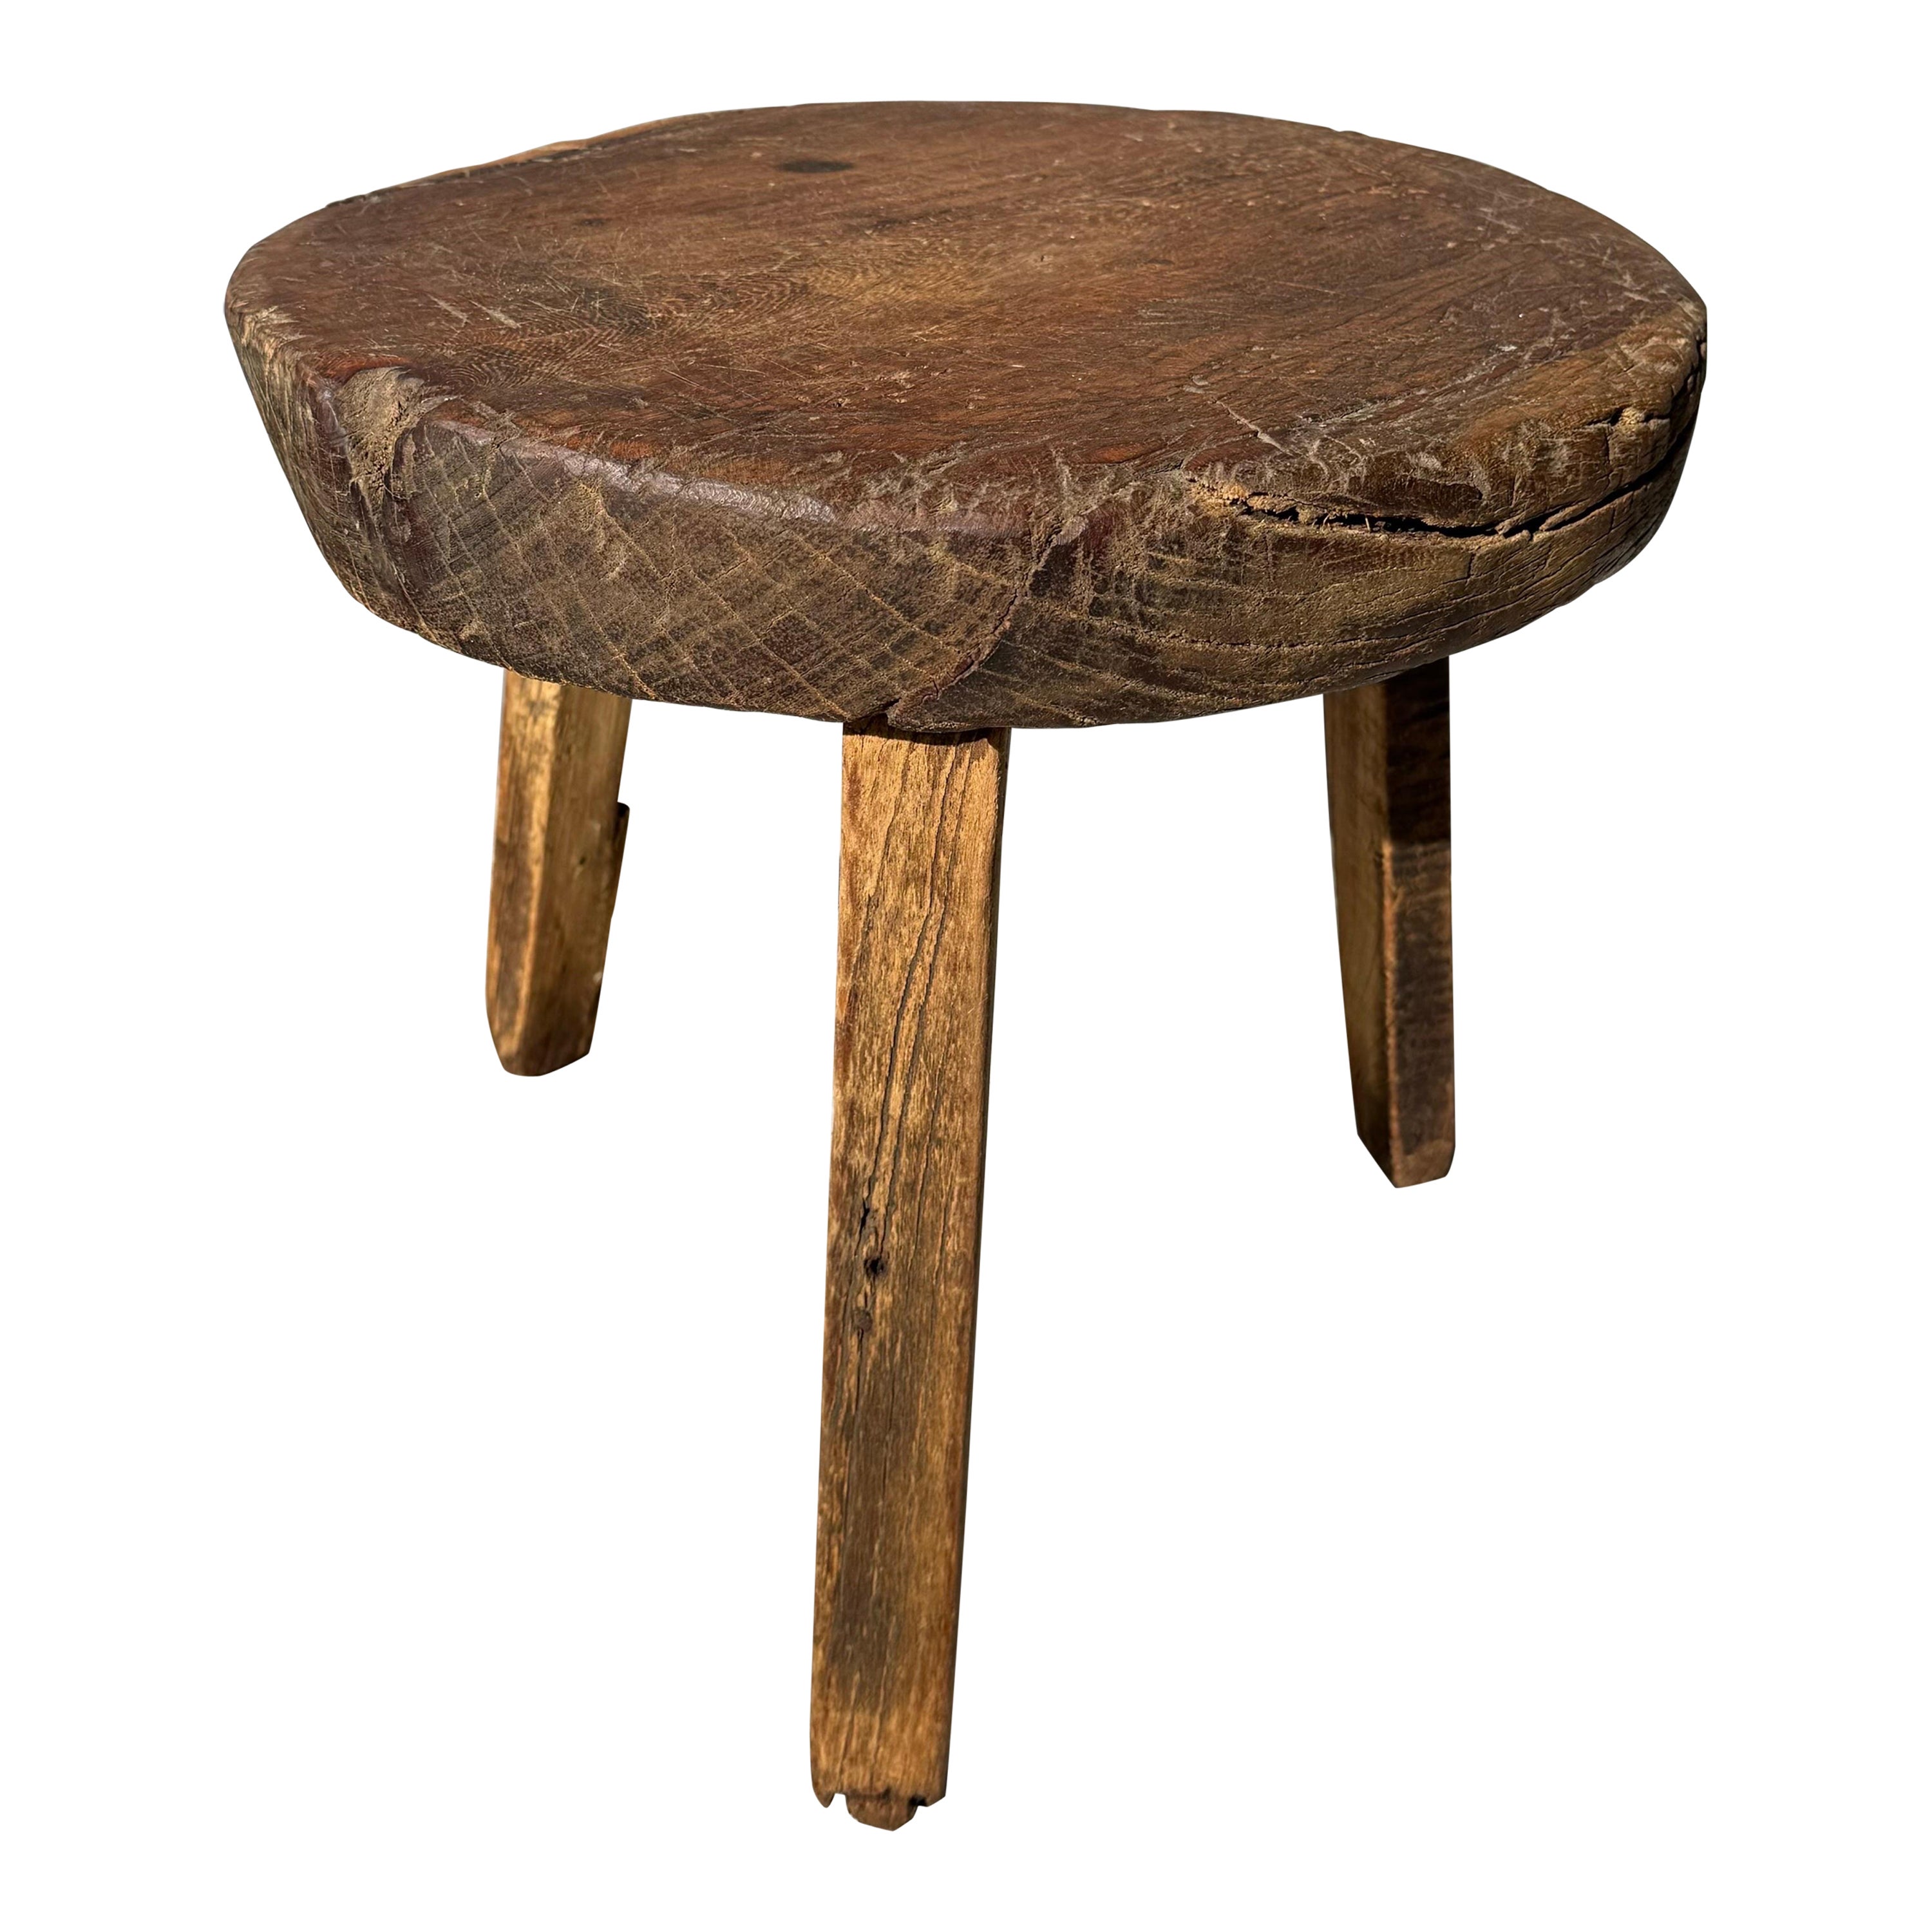 Primitive Hardwood Low Table From Mexico, Circa 1970´s